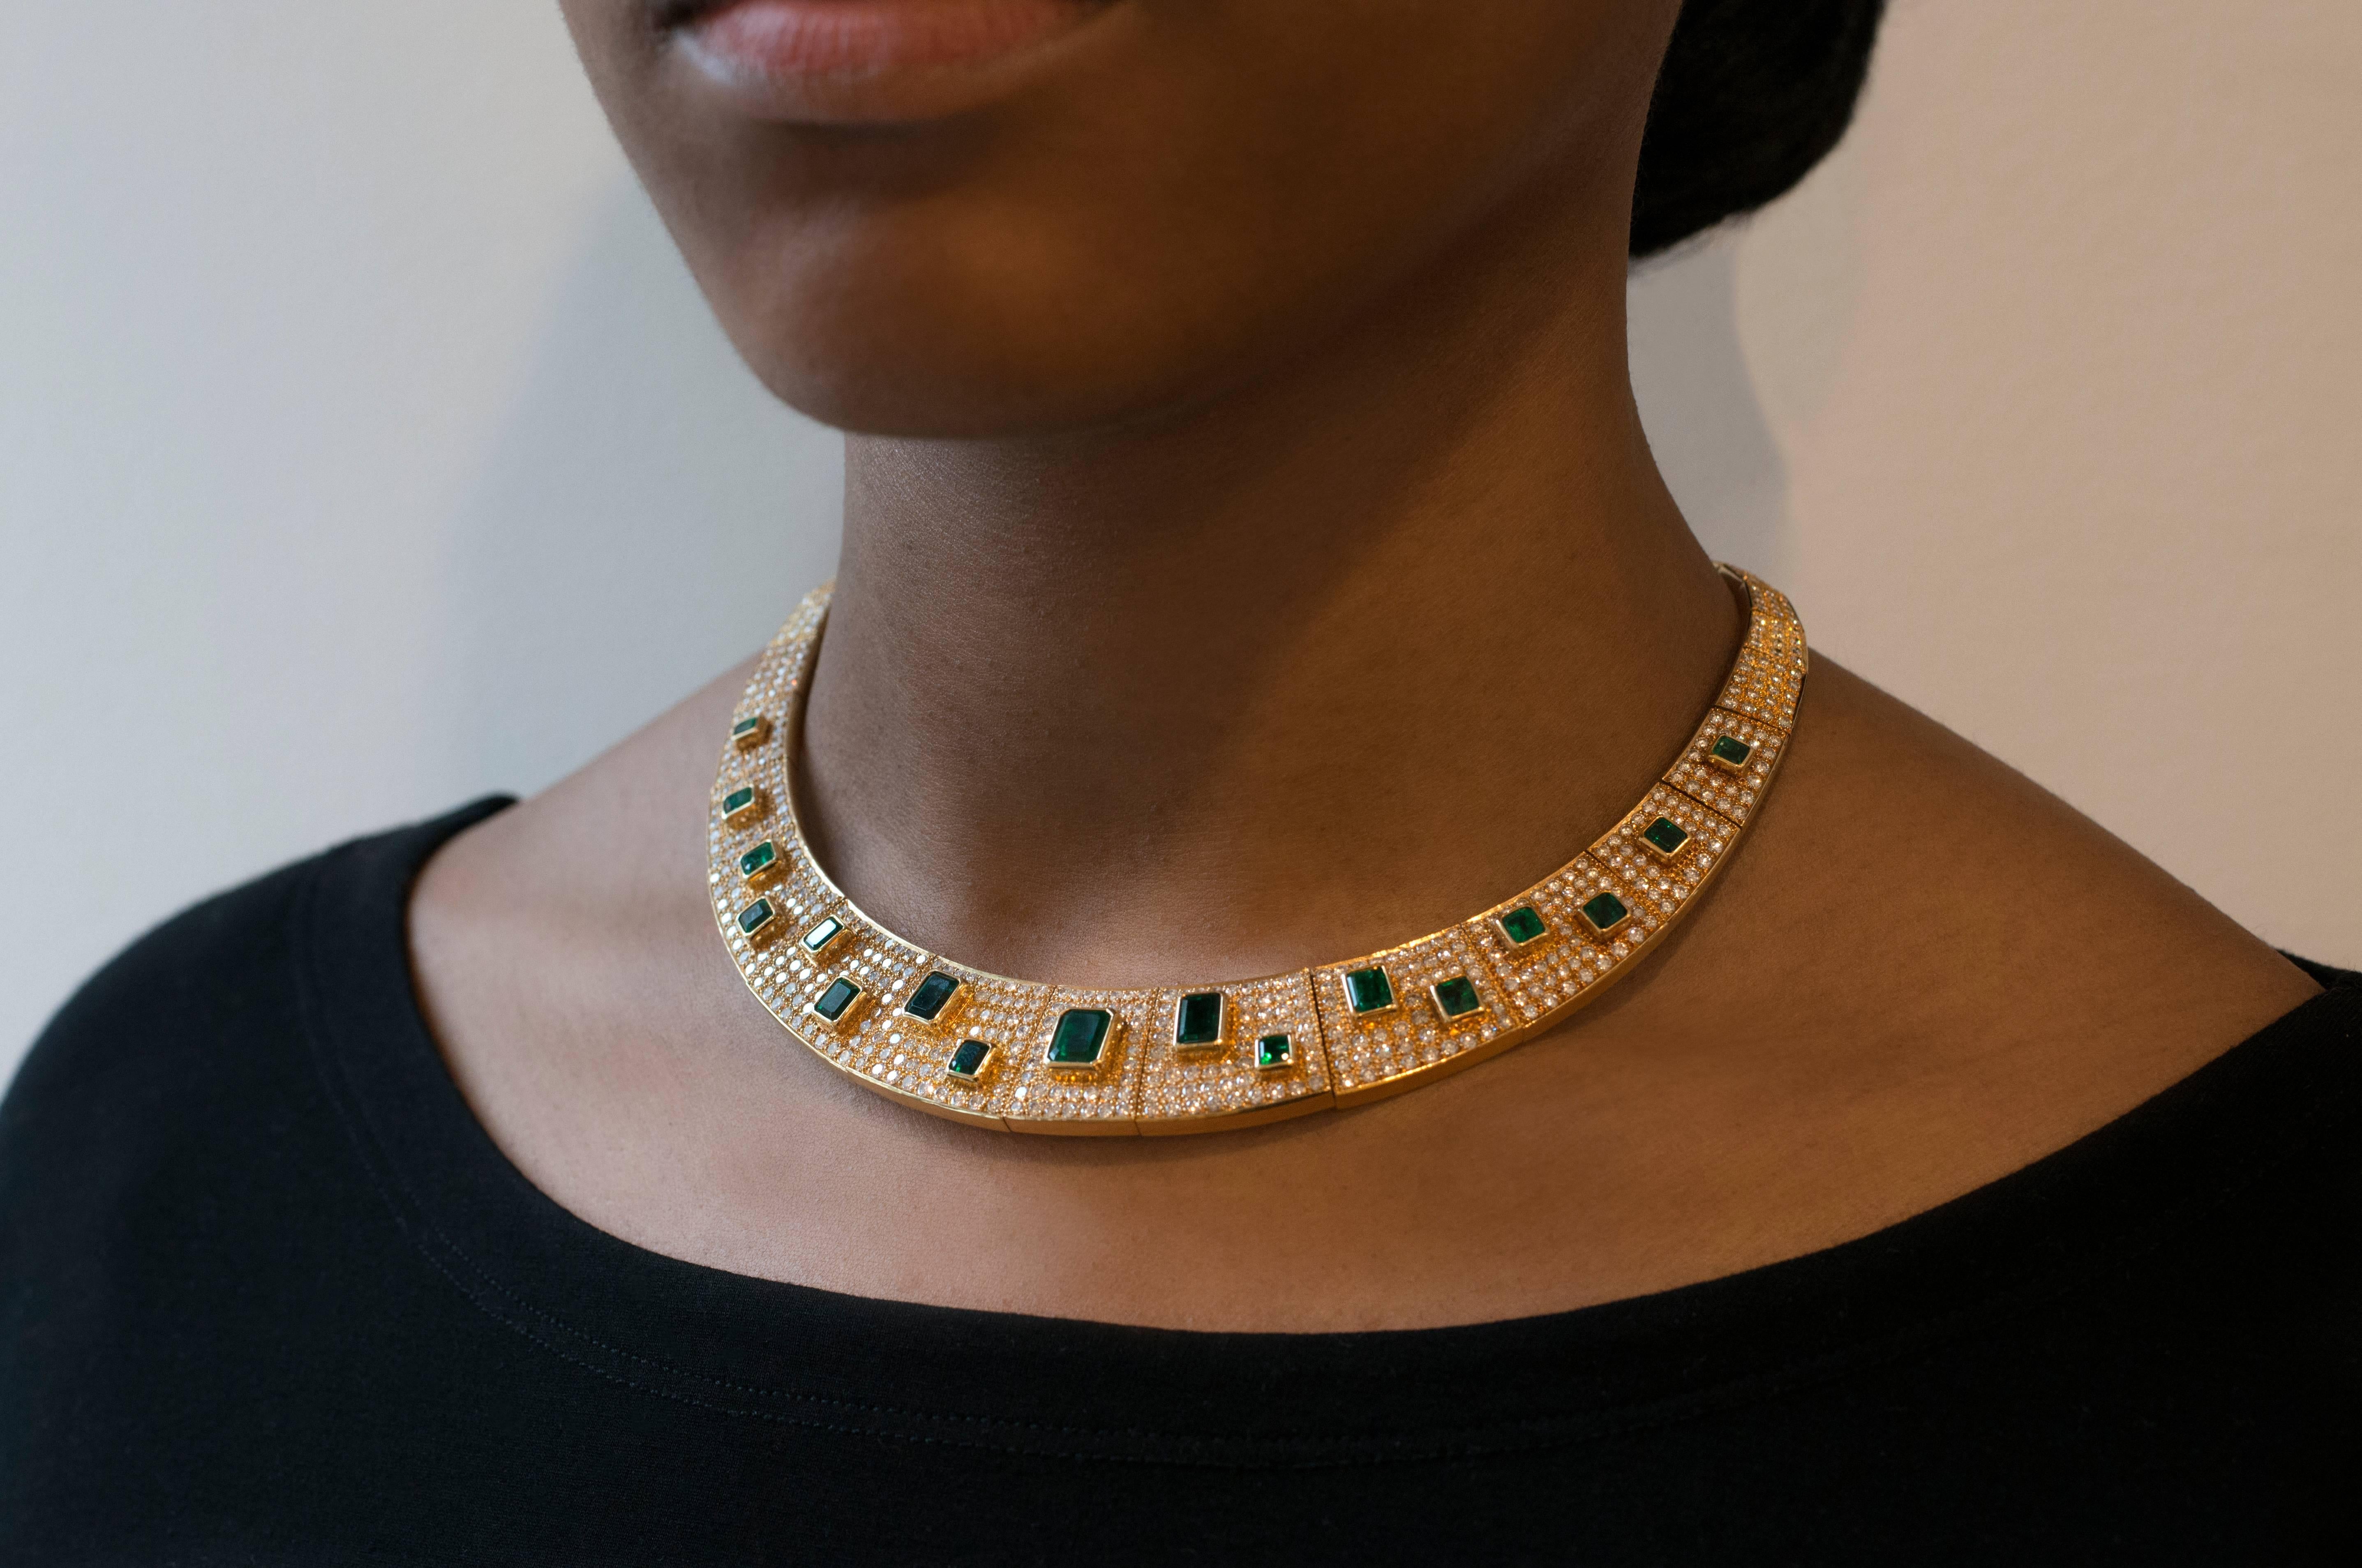 An emerald, pavé-set diamond and 18 karat gold necklace, by the famed Brazilian modernsit jewelry designer, Haroldo Burle Marx, c. 1980. 

The necklace has approximately 15 carats of pavé set diamonds total and over 18 carats of square and